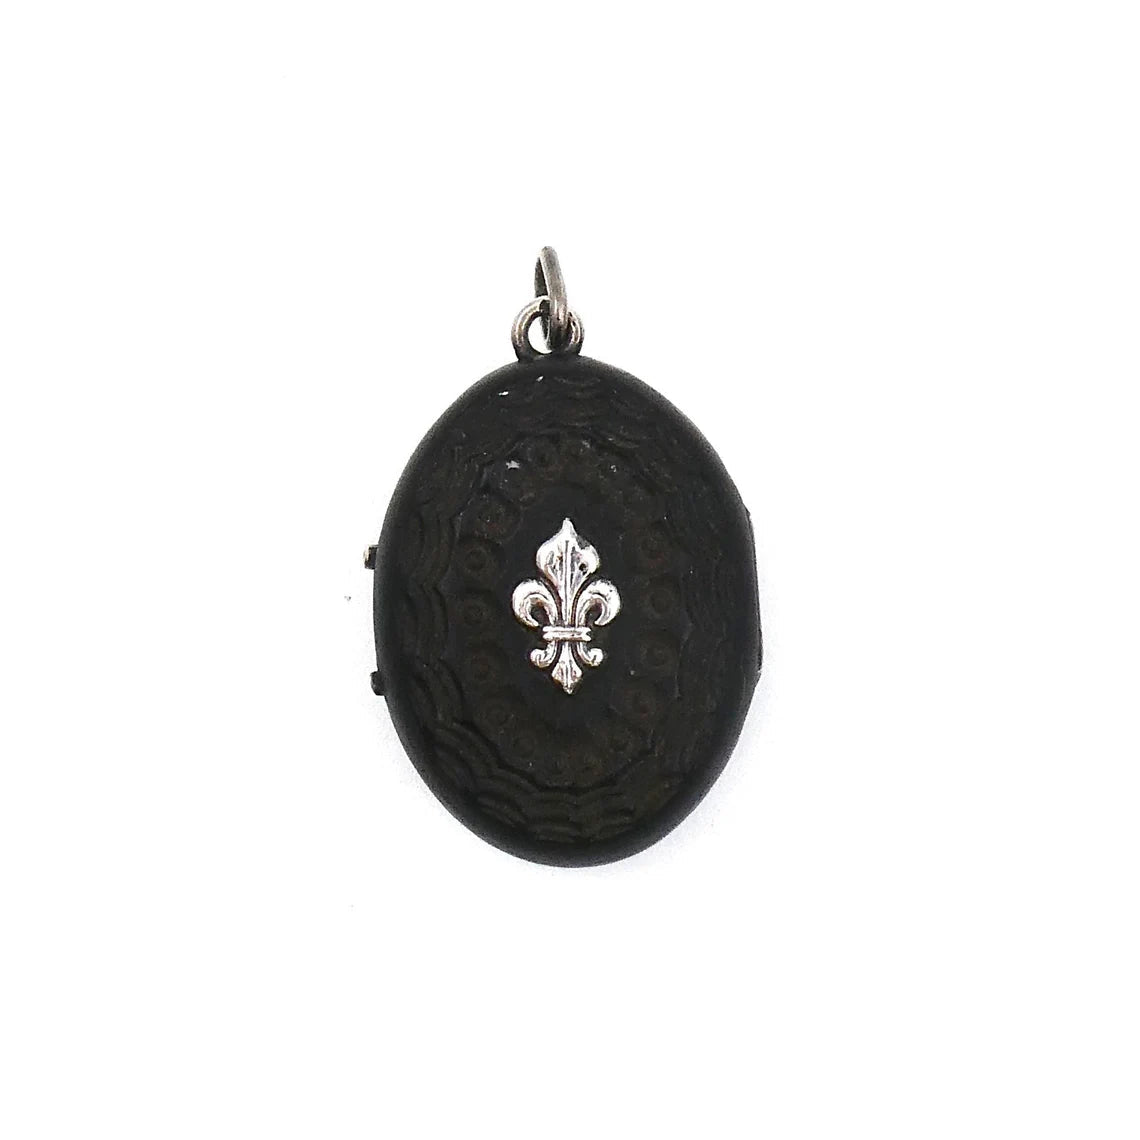 A unique carved black wooden locket with silver fleur de lis and initals in relief. - Collected